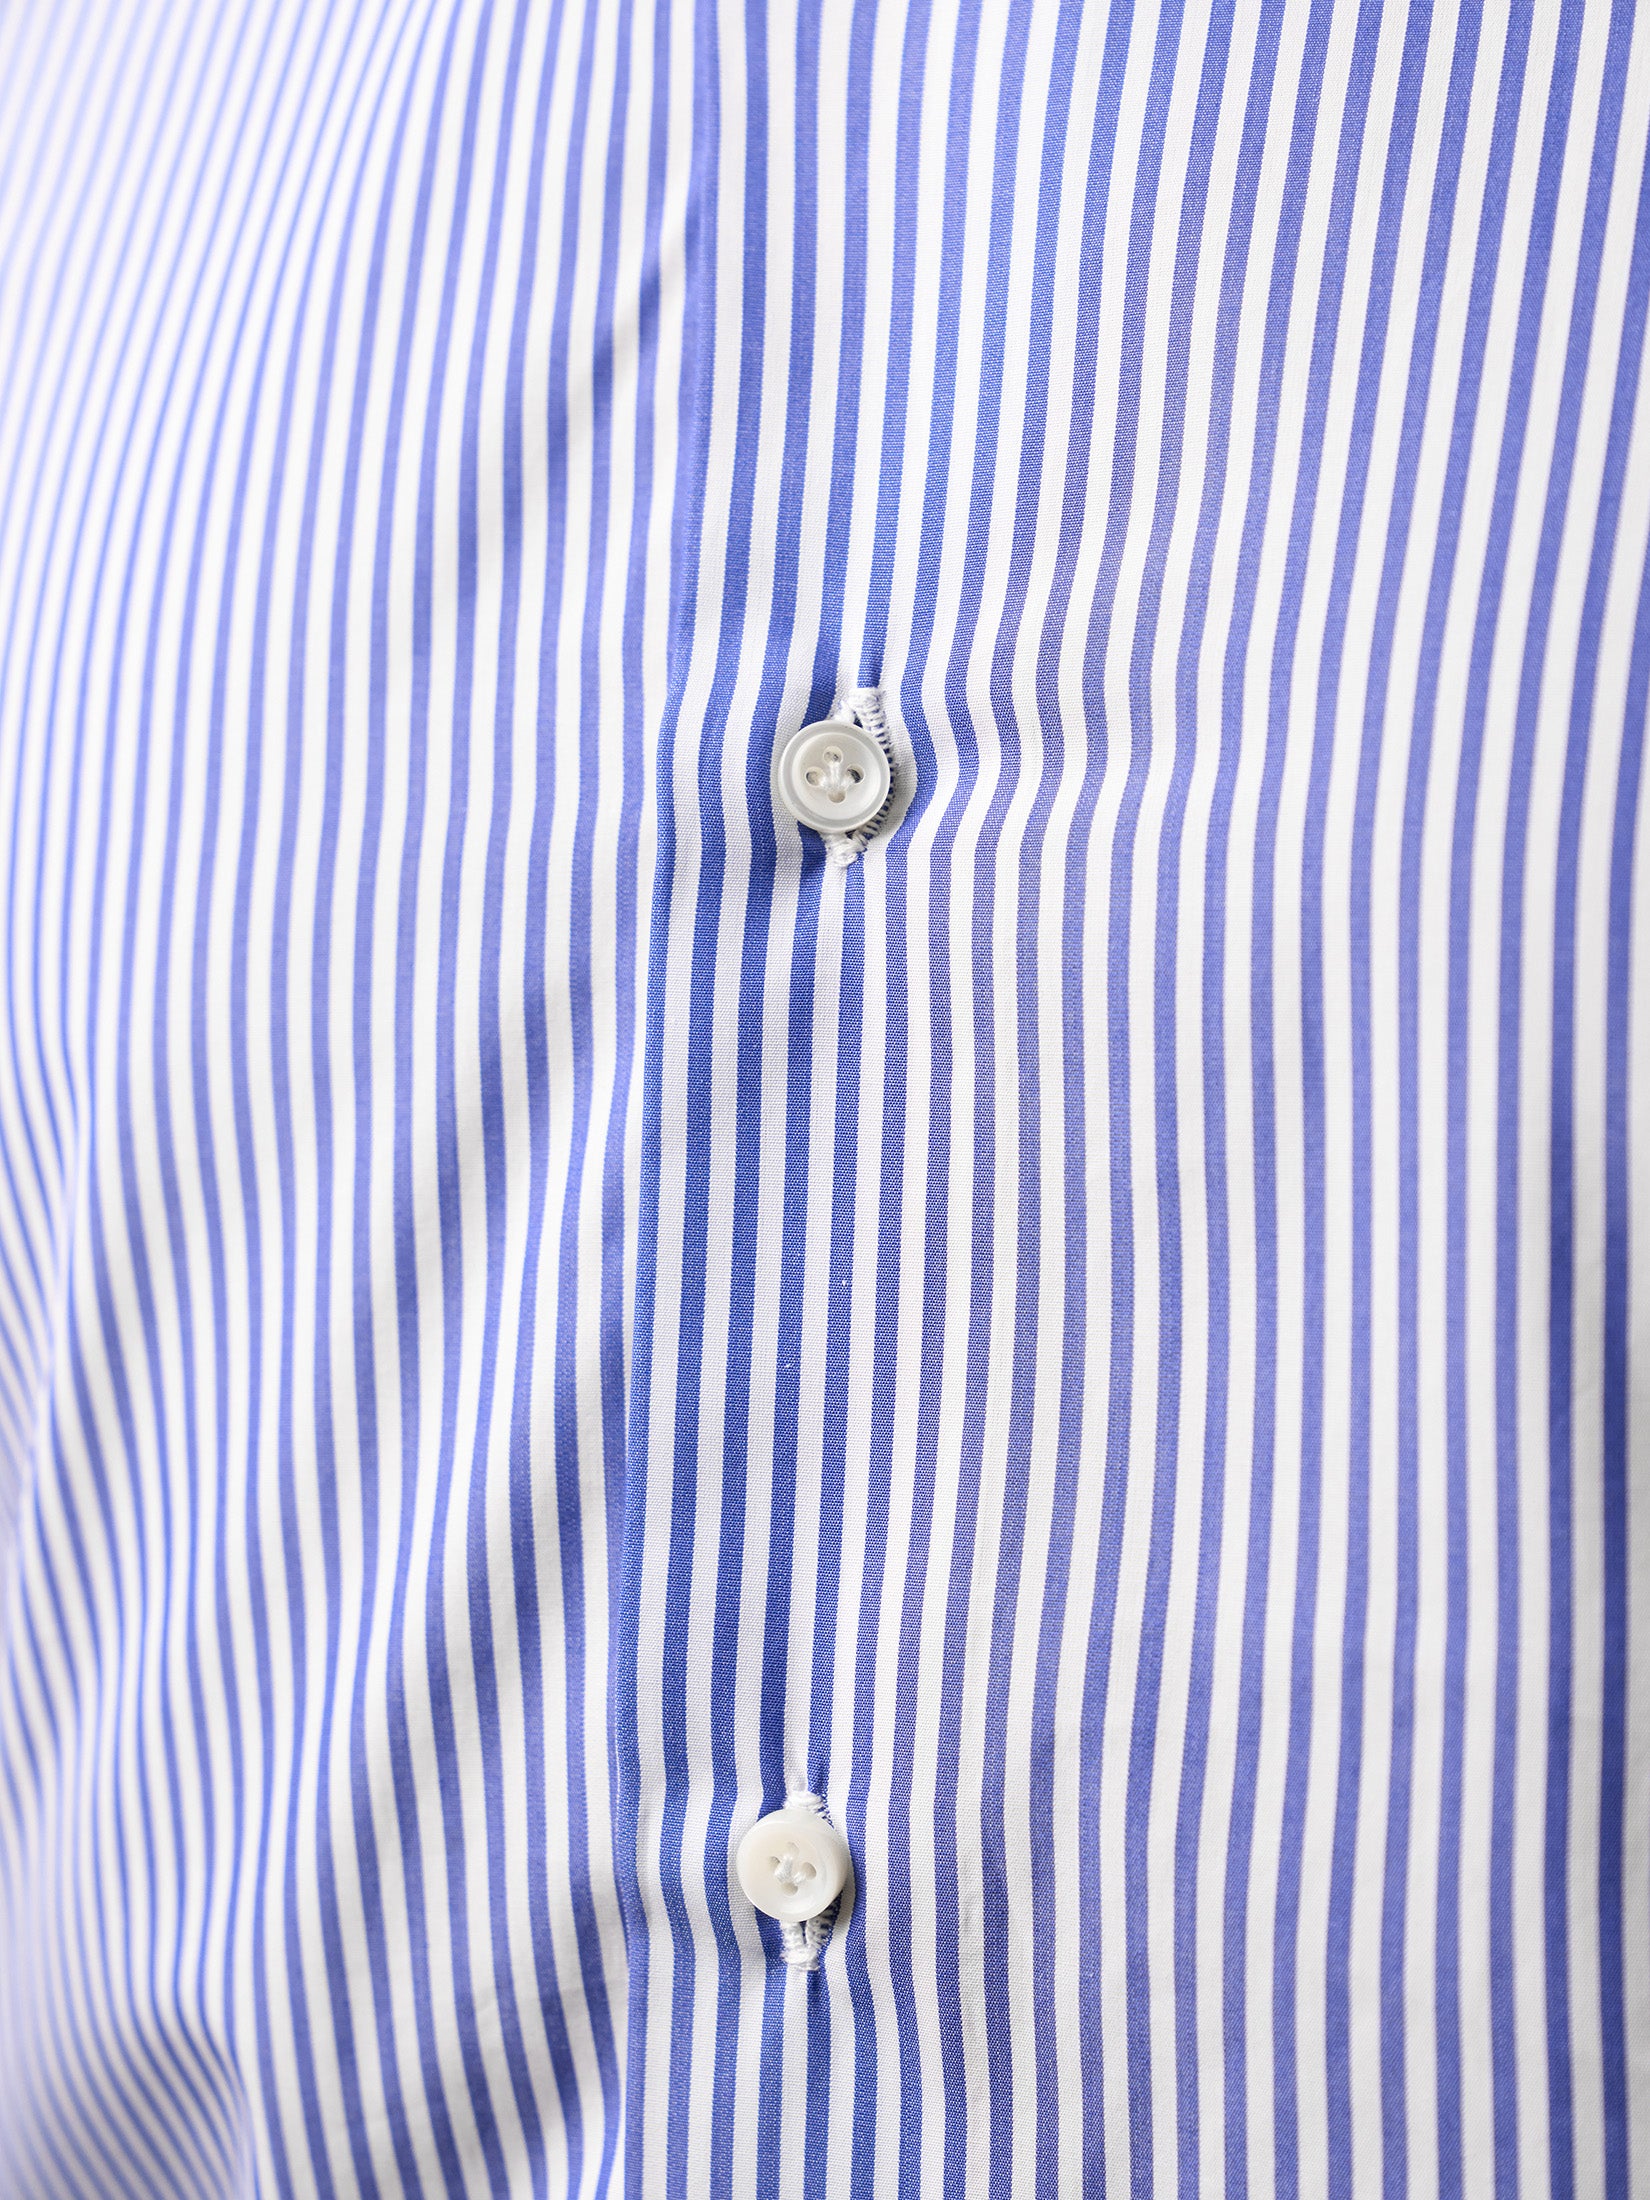 Formal Stripped White and Blue Bastoncino Shirt